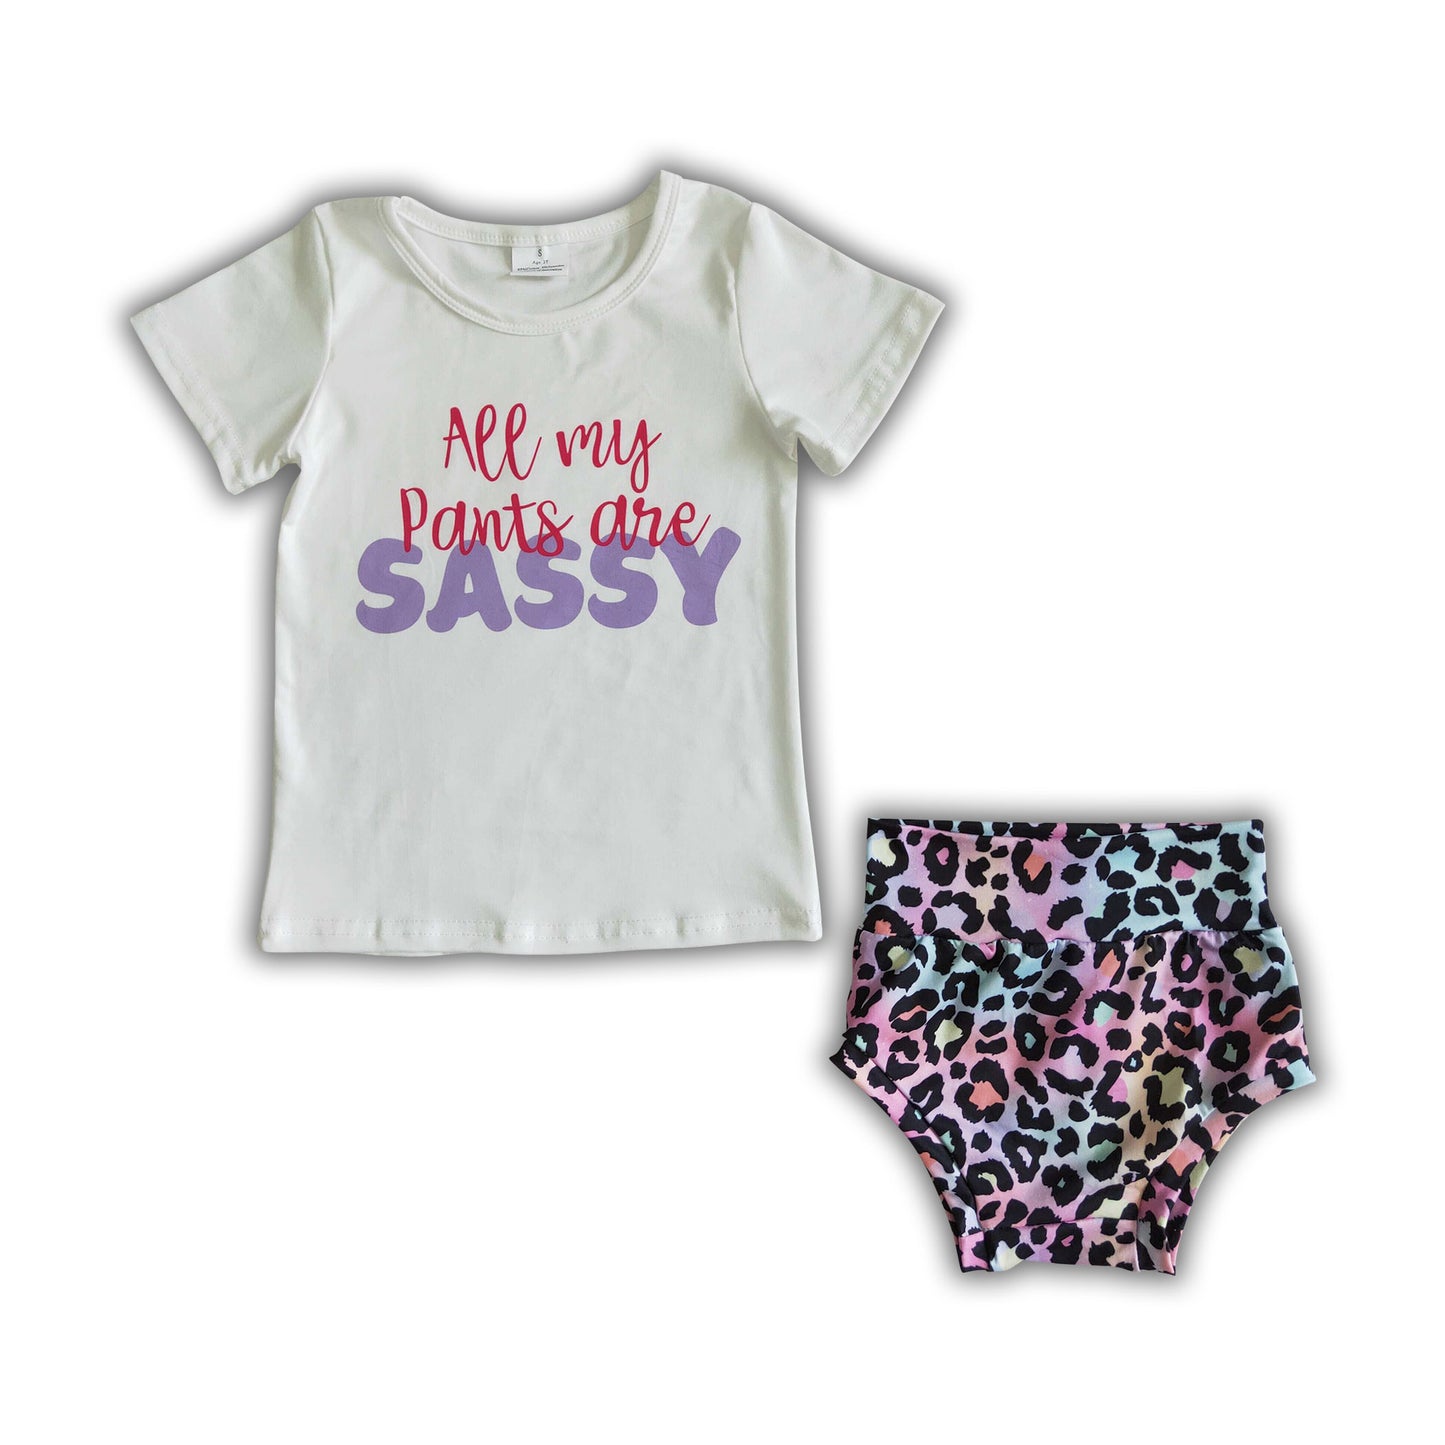 All my pants are sassy shirt leopard bummies baby outfits